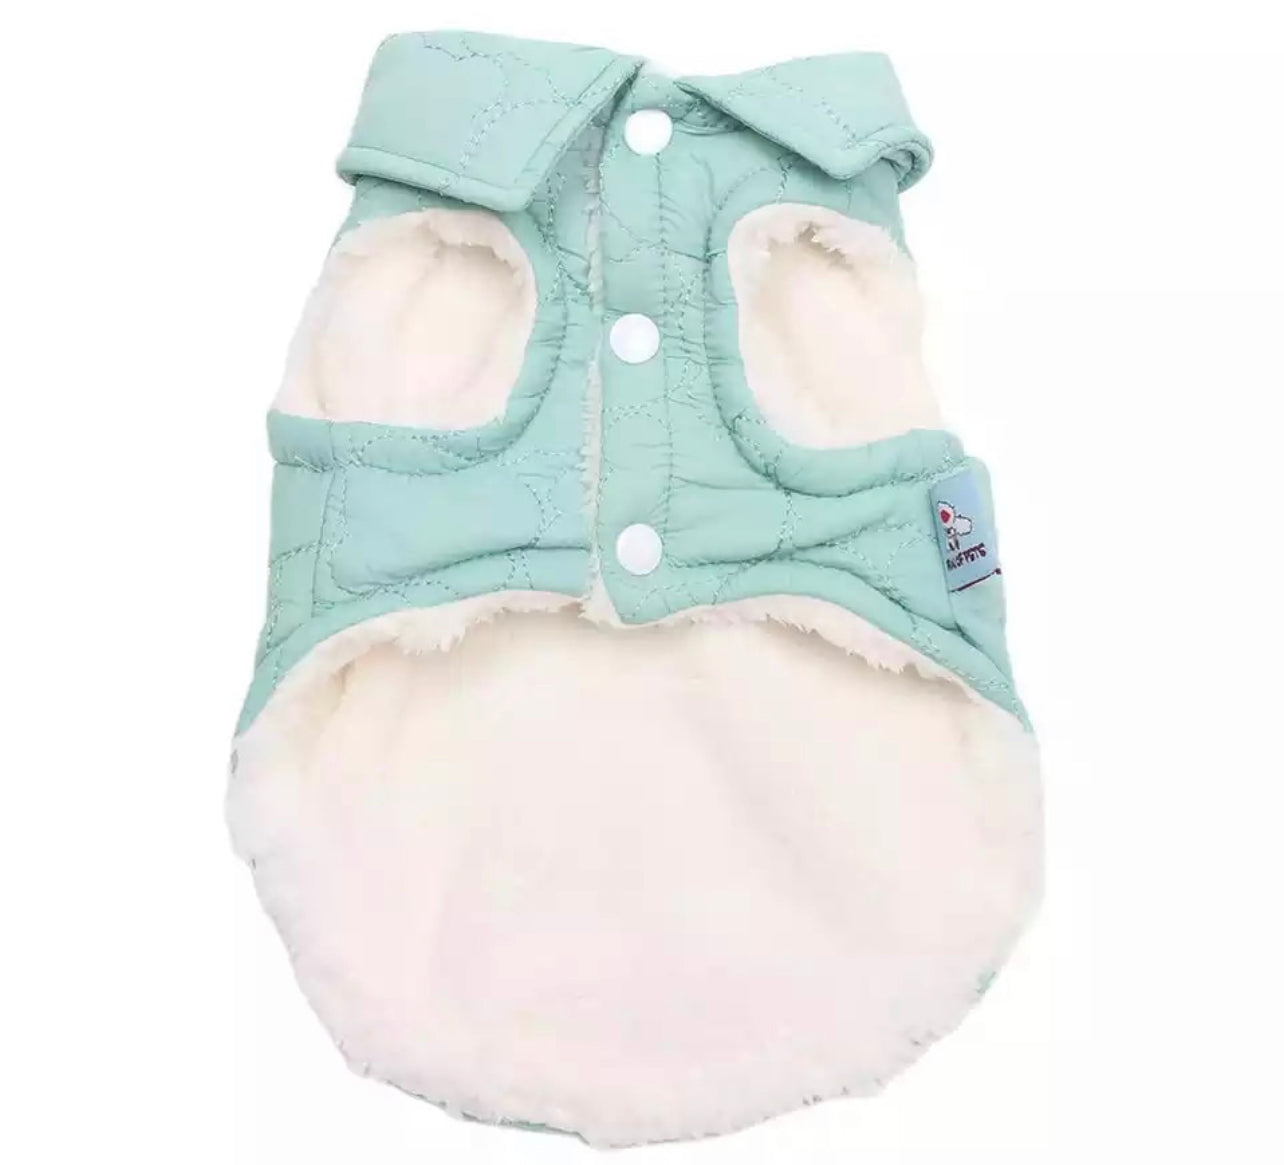 Faux Fur Lined Quilted Bow Gilet Jacket with D Ring Harness - Mint/White